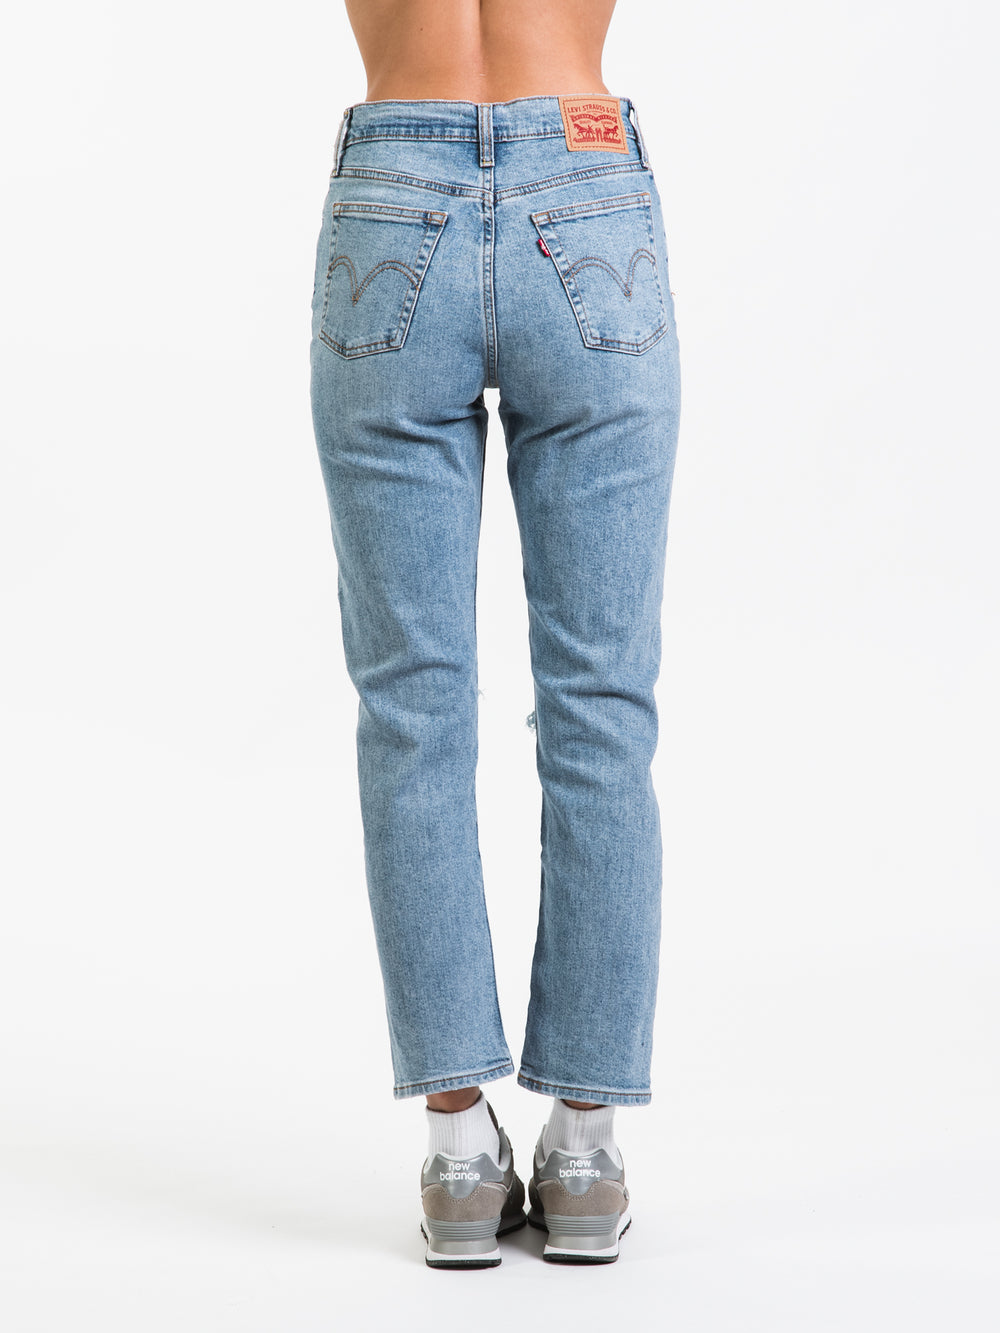 Levi's Wedgie Fit Jeans - Shop the Iconic Wedgie Jean